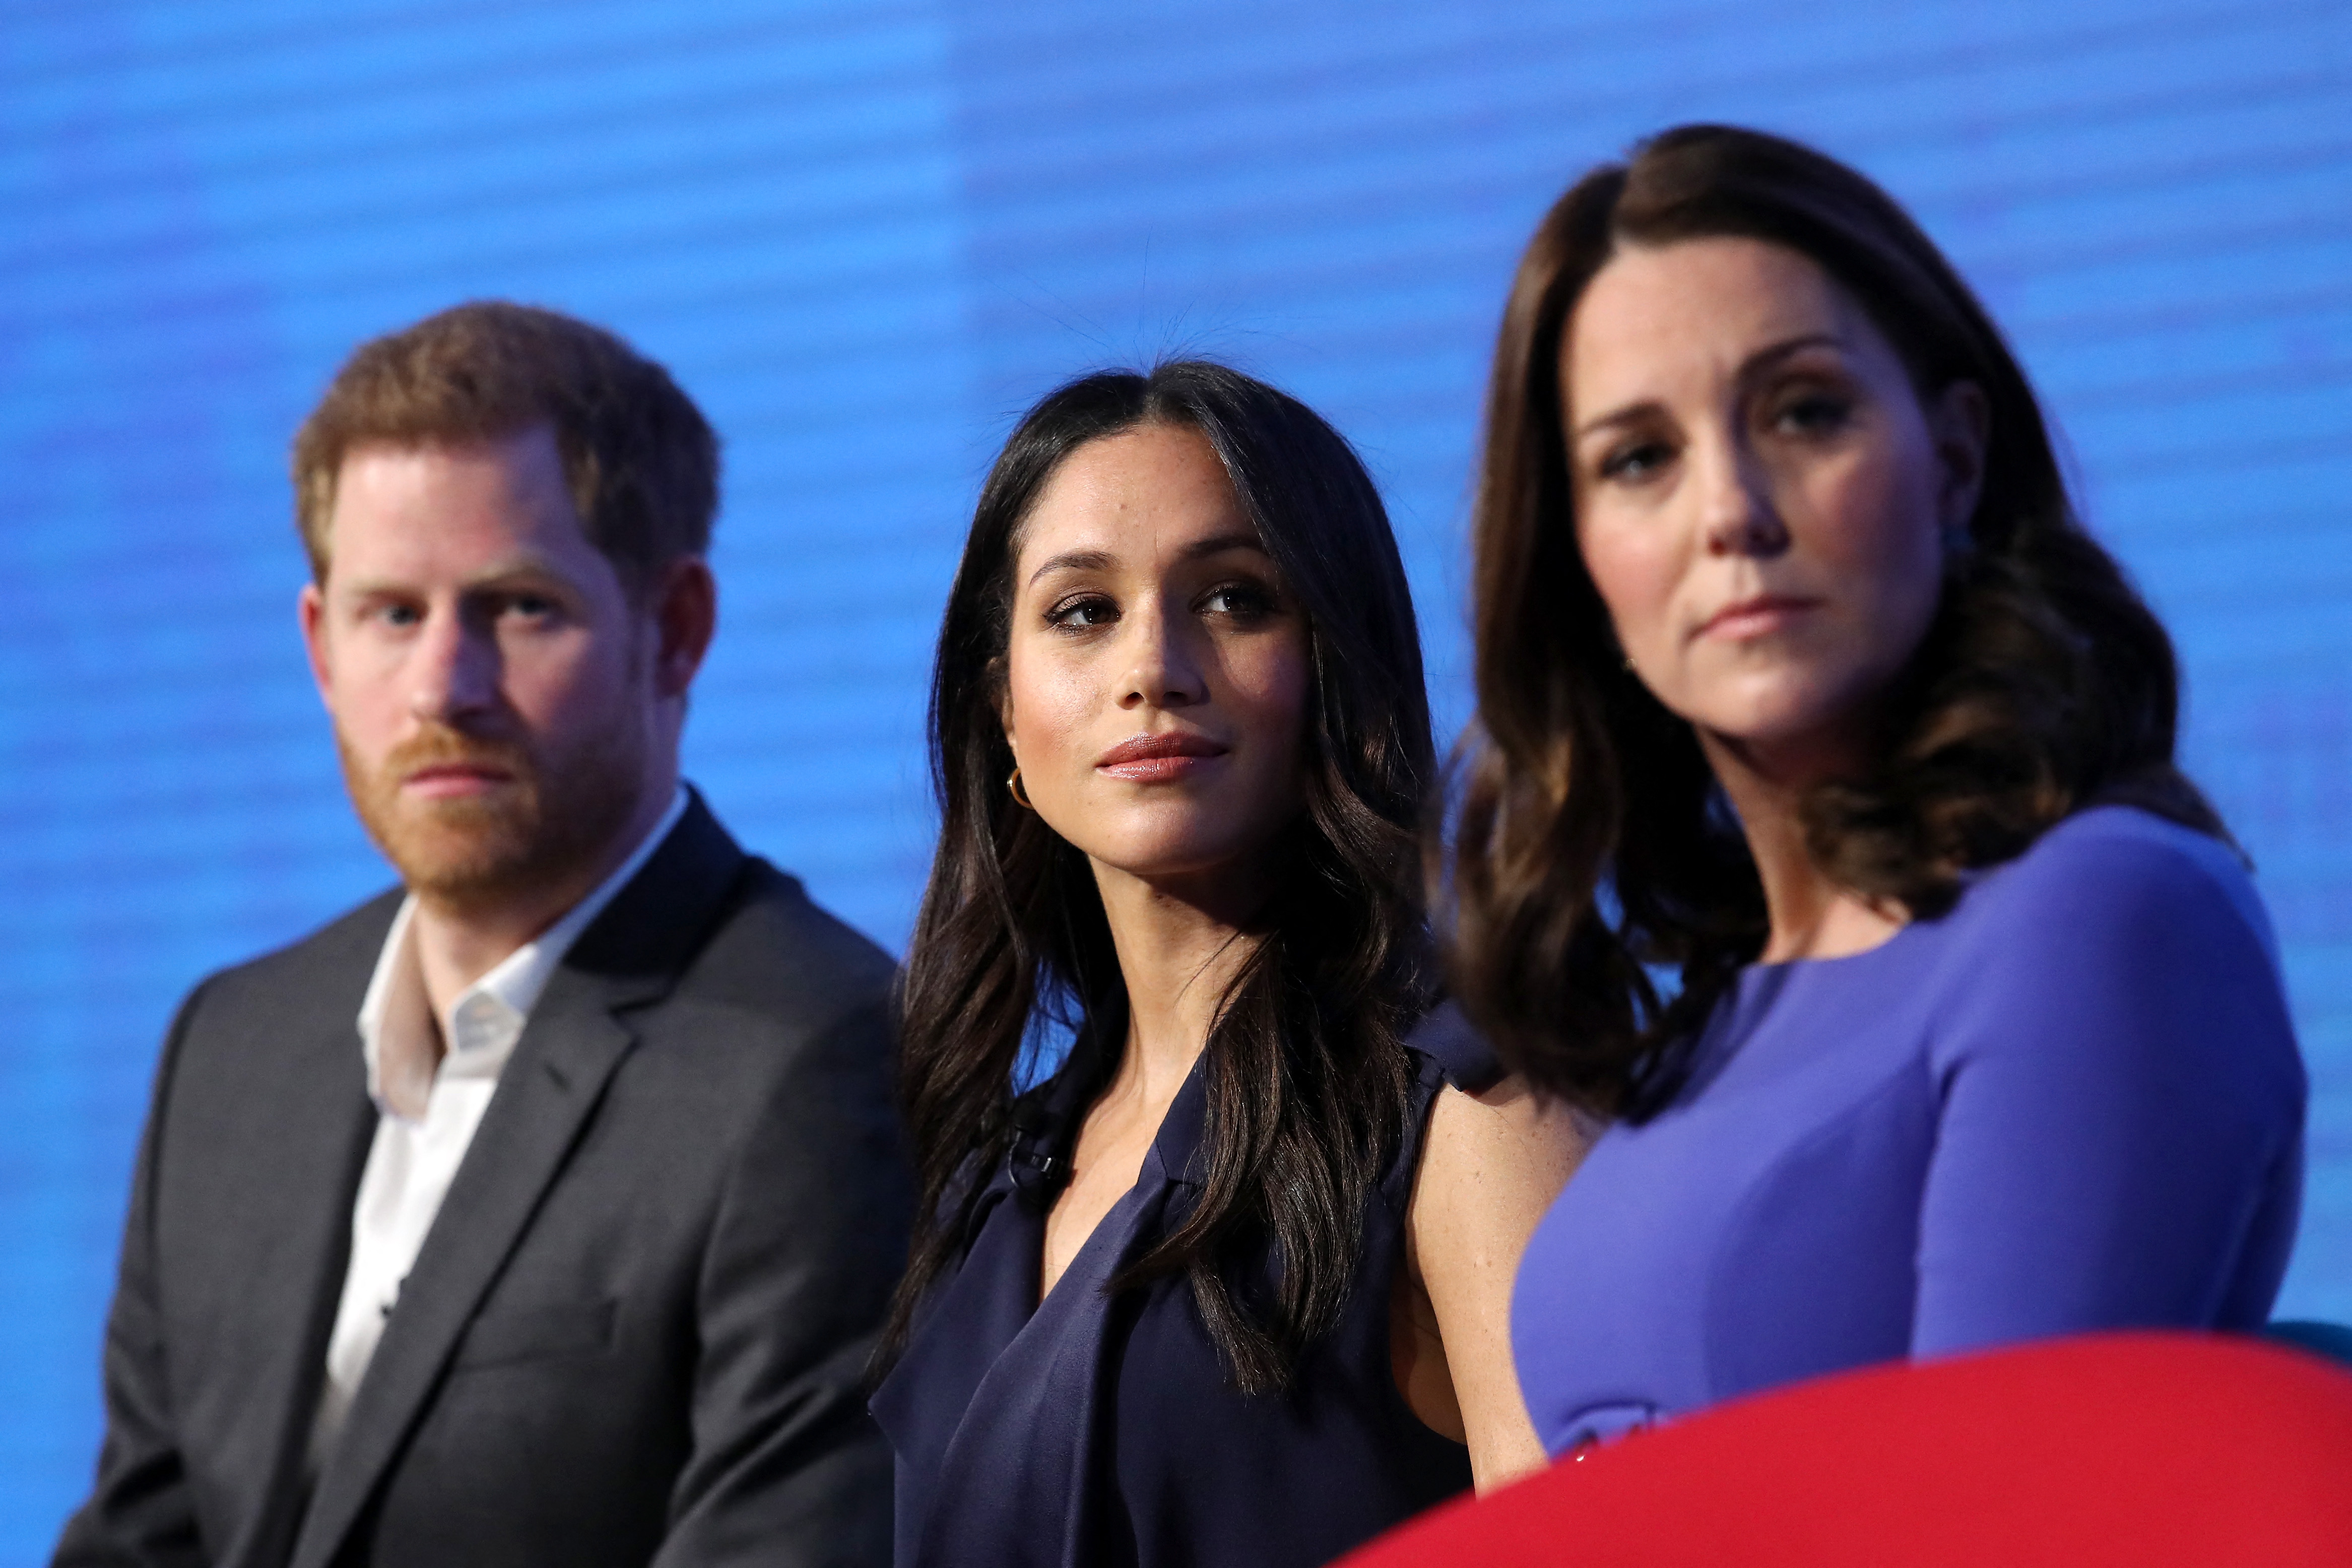 Prince Harry, Meghan Markle, and Kate Middleton at the first annual Royal Foundation Forum on February 28, 2018, in London. | Source: Getty Images